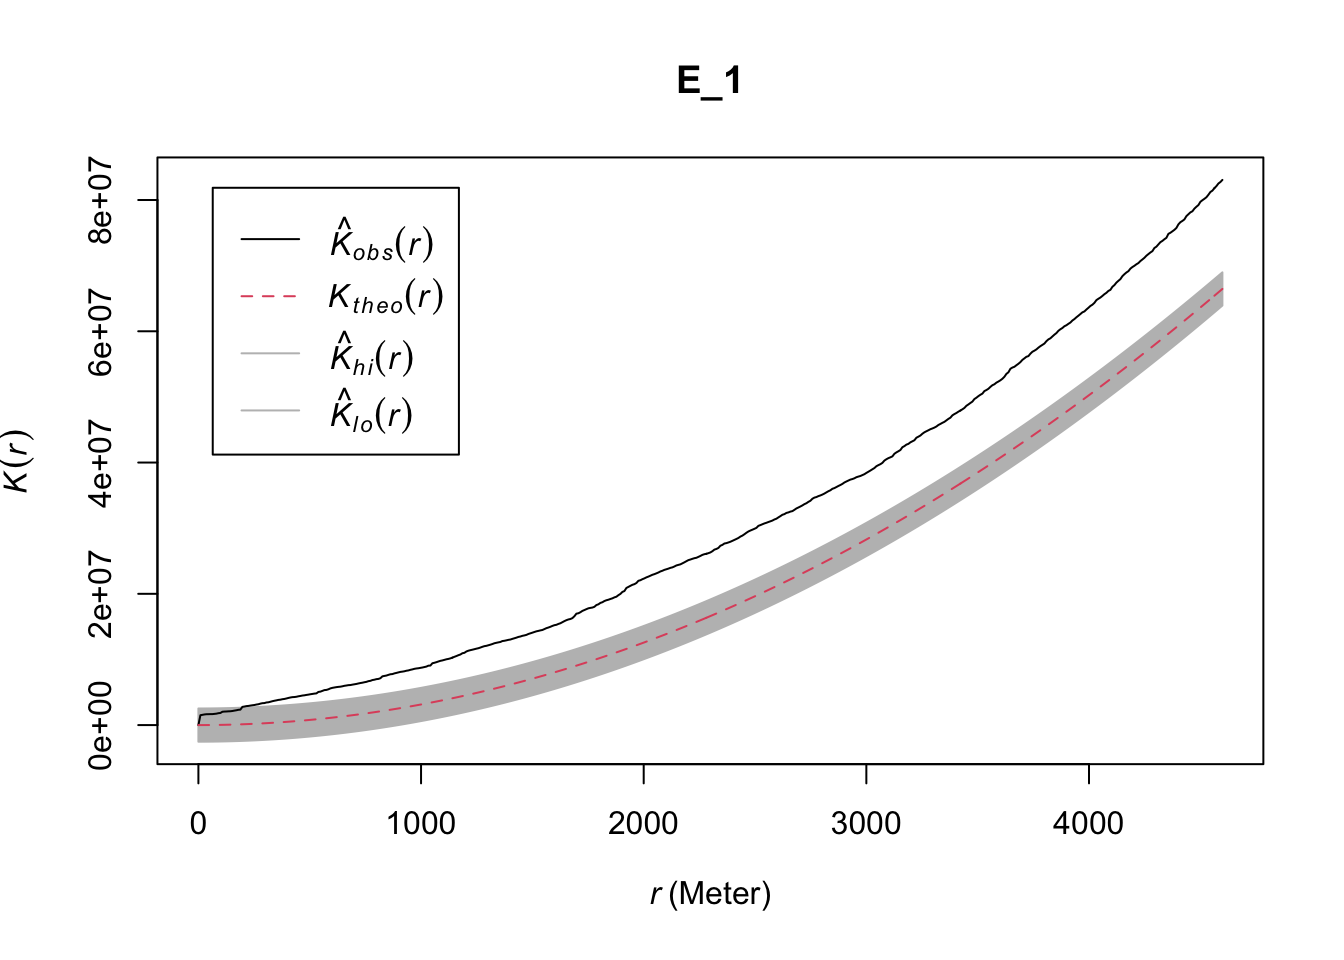 A plot similar to the previous figure, titled 'E 1'. The curve previously labeled as 'K hat iso of r', now bears the label 'K hat obs of r', and is joined by one other curve 'K theo of r', which looks similar to the previous 'K pois of r'. This second curve is enveloped by a thick grey backdrop, covering values close to the line. The envelope overlaps with the first line until around two hundred.